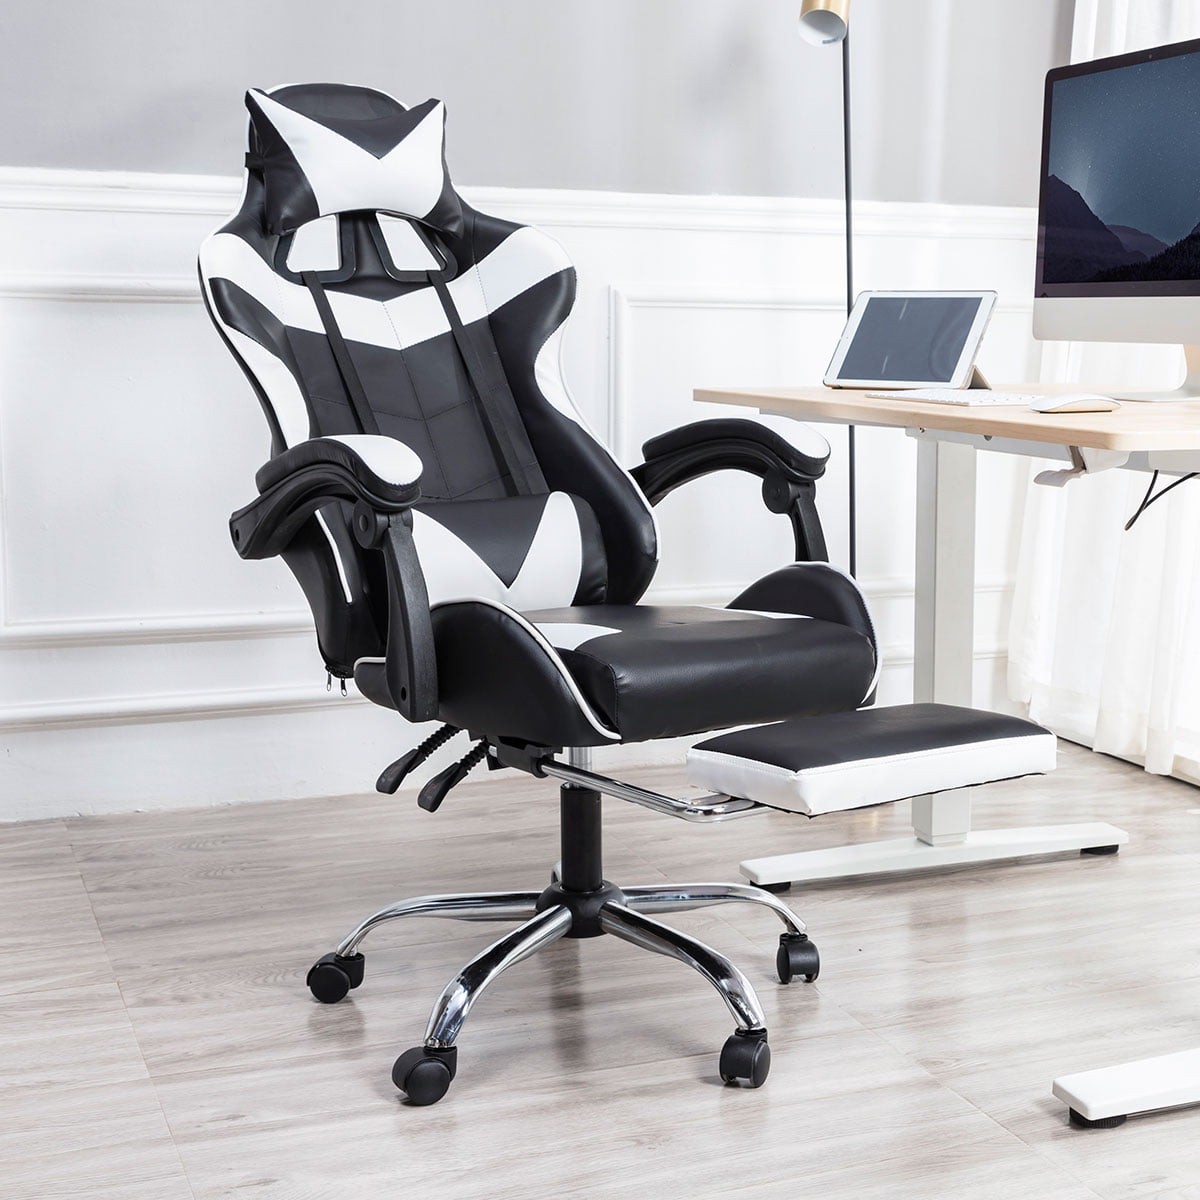 Details about   Ergonomic Executive Office Chair Racing Gaming Chair Computer Desk Swivel Seat 